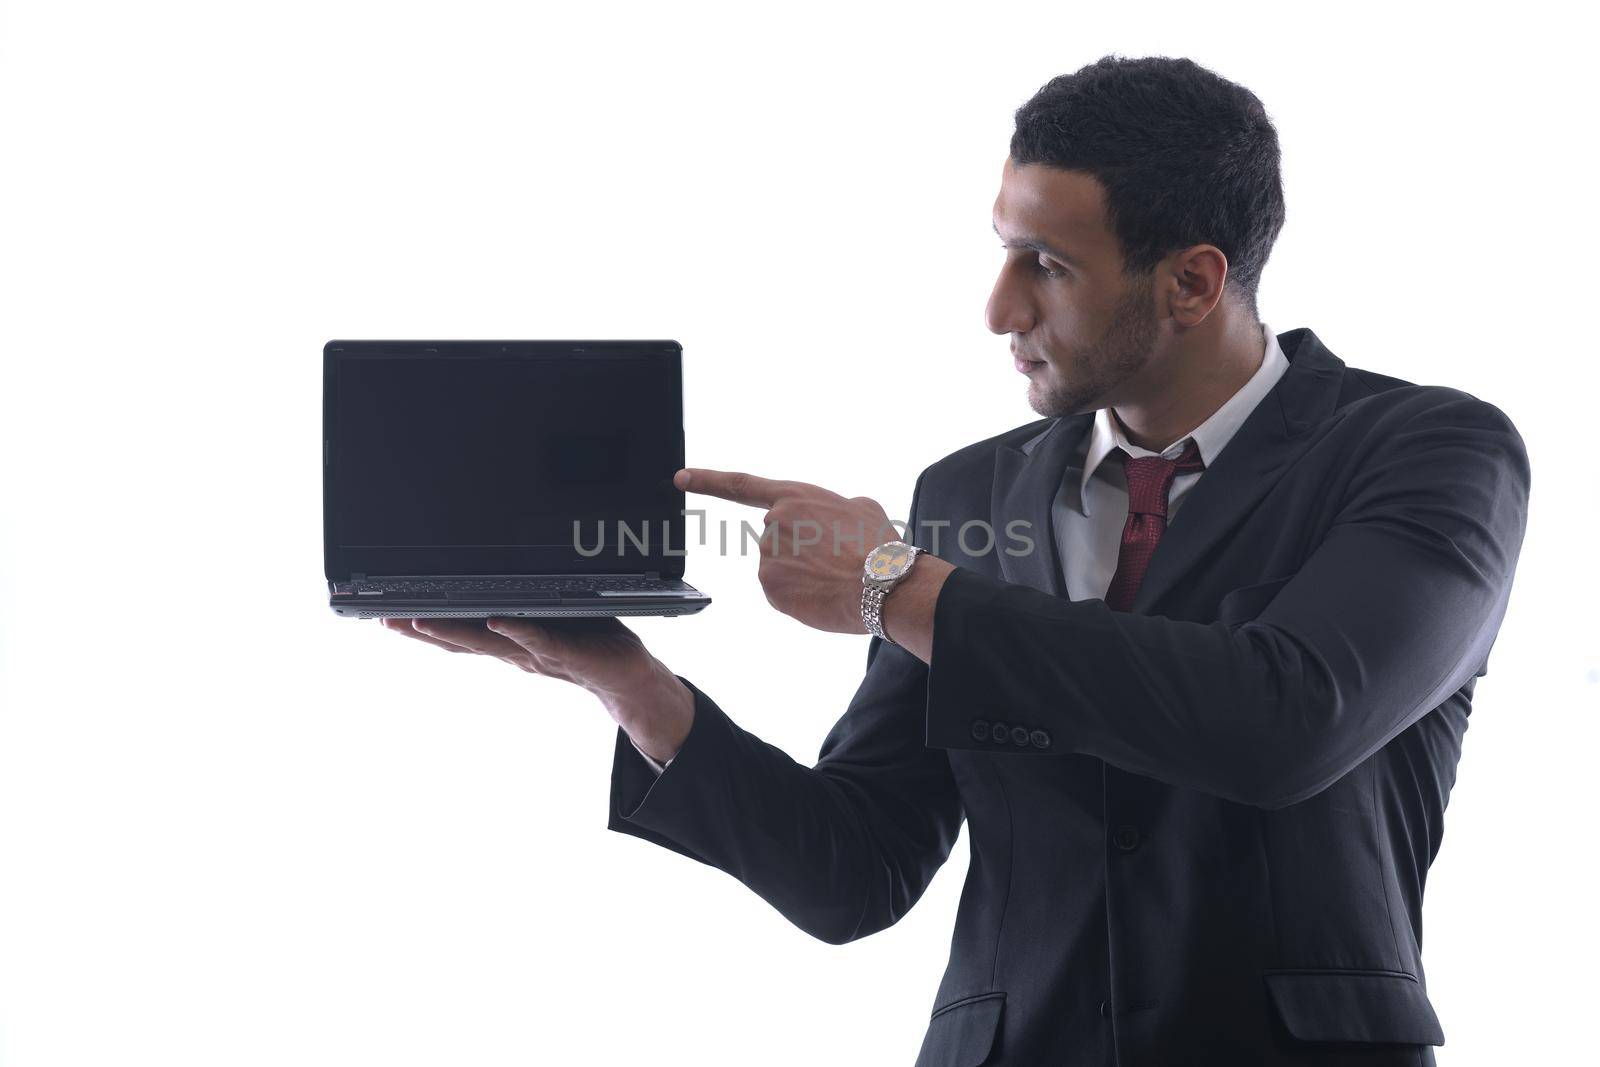 Smiling business man hold and work on mini laptop comuter   Isolated on white background in studio